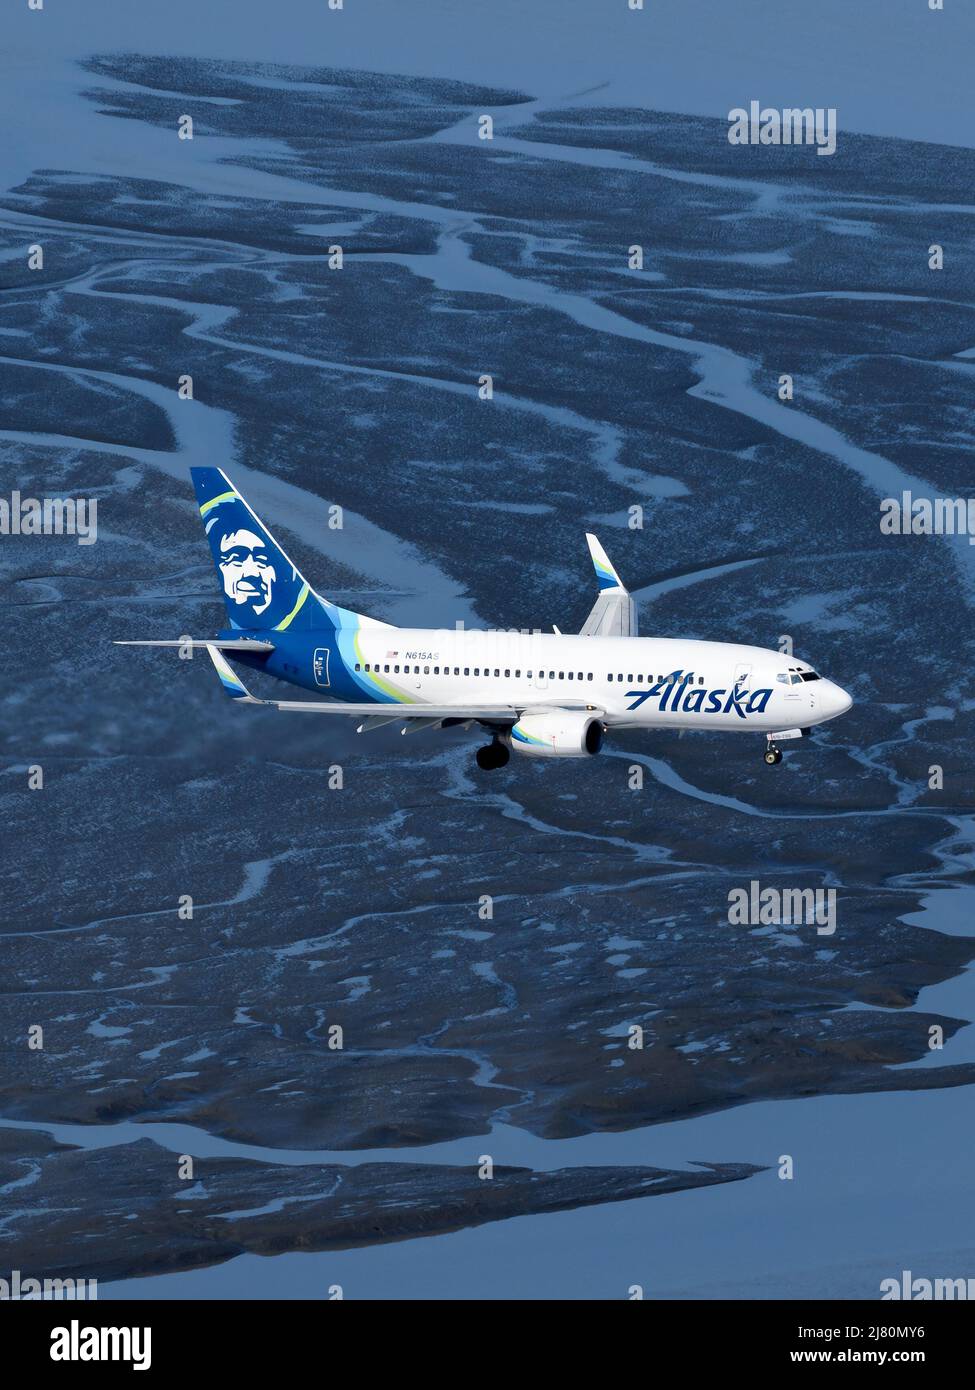 Alaska Airlines Boeing 737 airplane from above. Aircraft of Alaska Airlines aerial view over water. 737-700 plane. Stock Photo